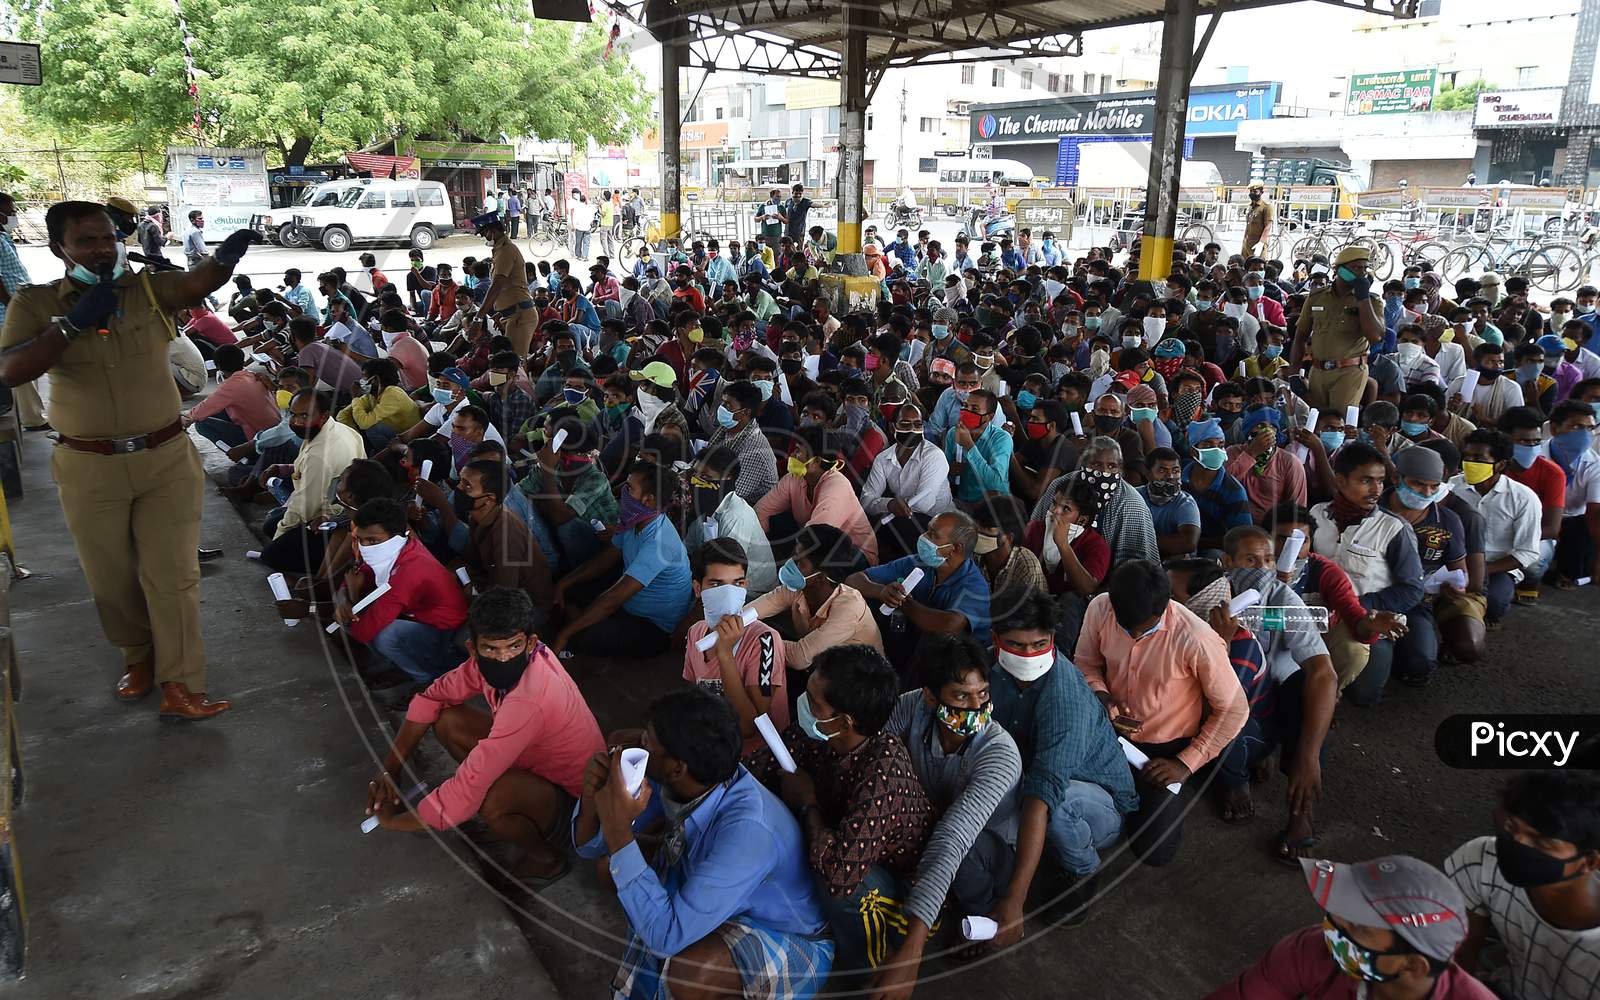 Migrant Labourers From Bihar Wait To Get Thermal Screening And Document Verification Before They Leave To Them Native Places During The Ongoing Nationwide Lockdown In The Wake Of Coronavirus Pandemic, In Chennai